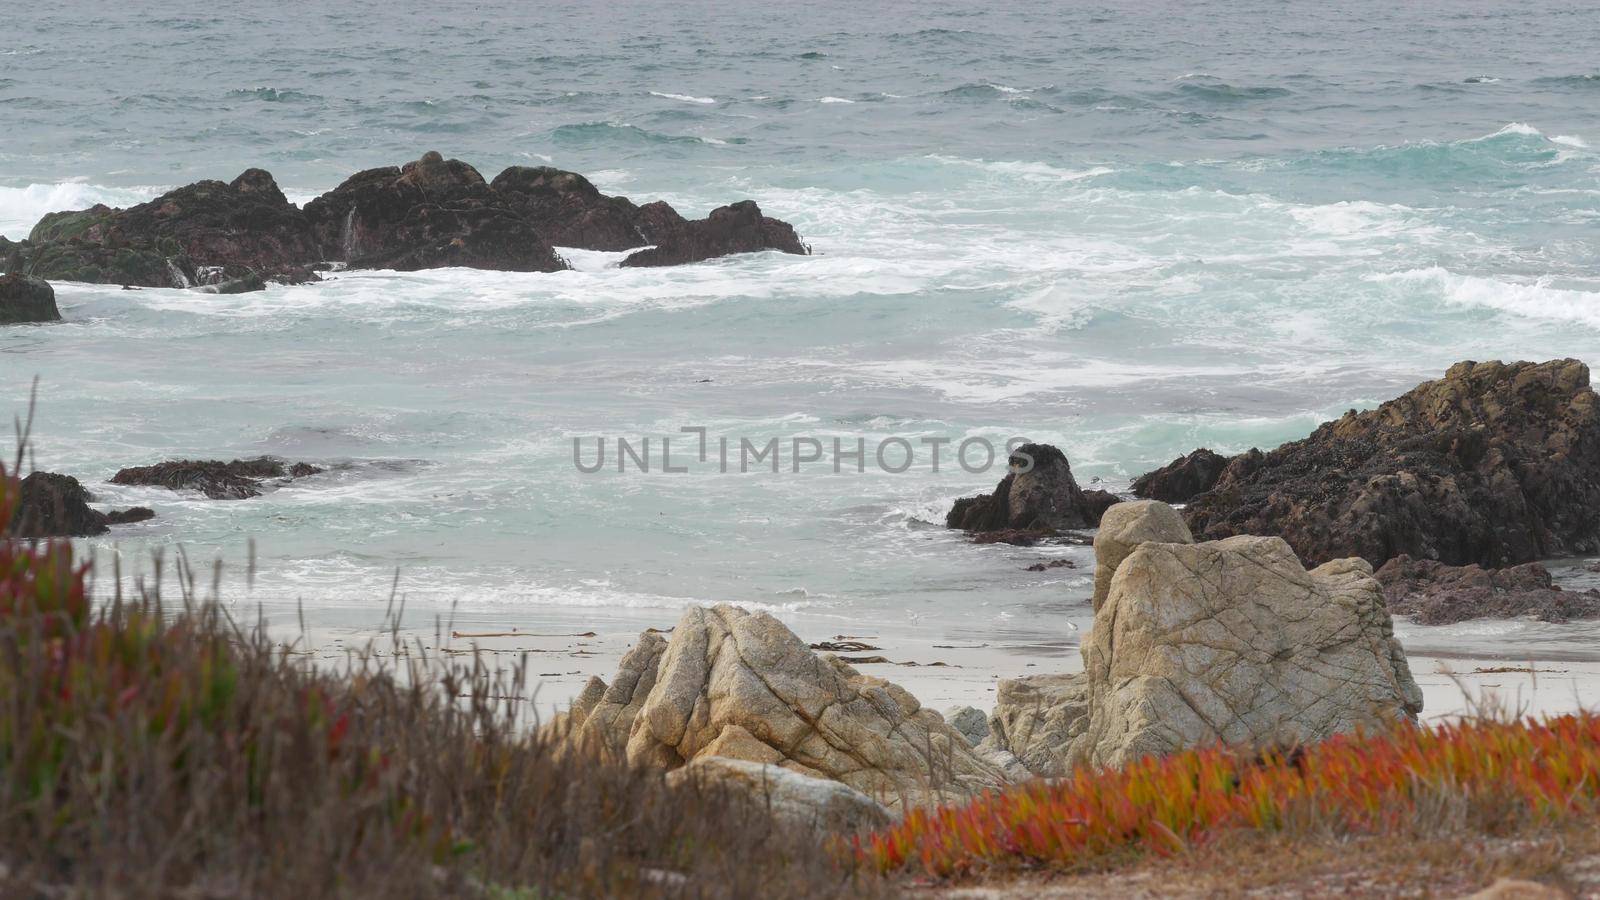 17-mile drive, Monterey, California USA. Rocky craggy ocean, sea water waves crashing. Pacific coast highway, nature near Point Lobos, Big Sur, Pebble beach. Seamless looped cinemagraph live wallpaper